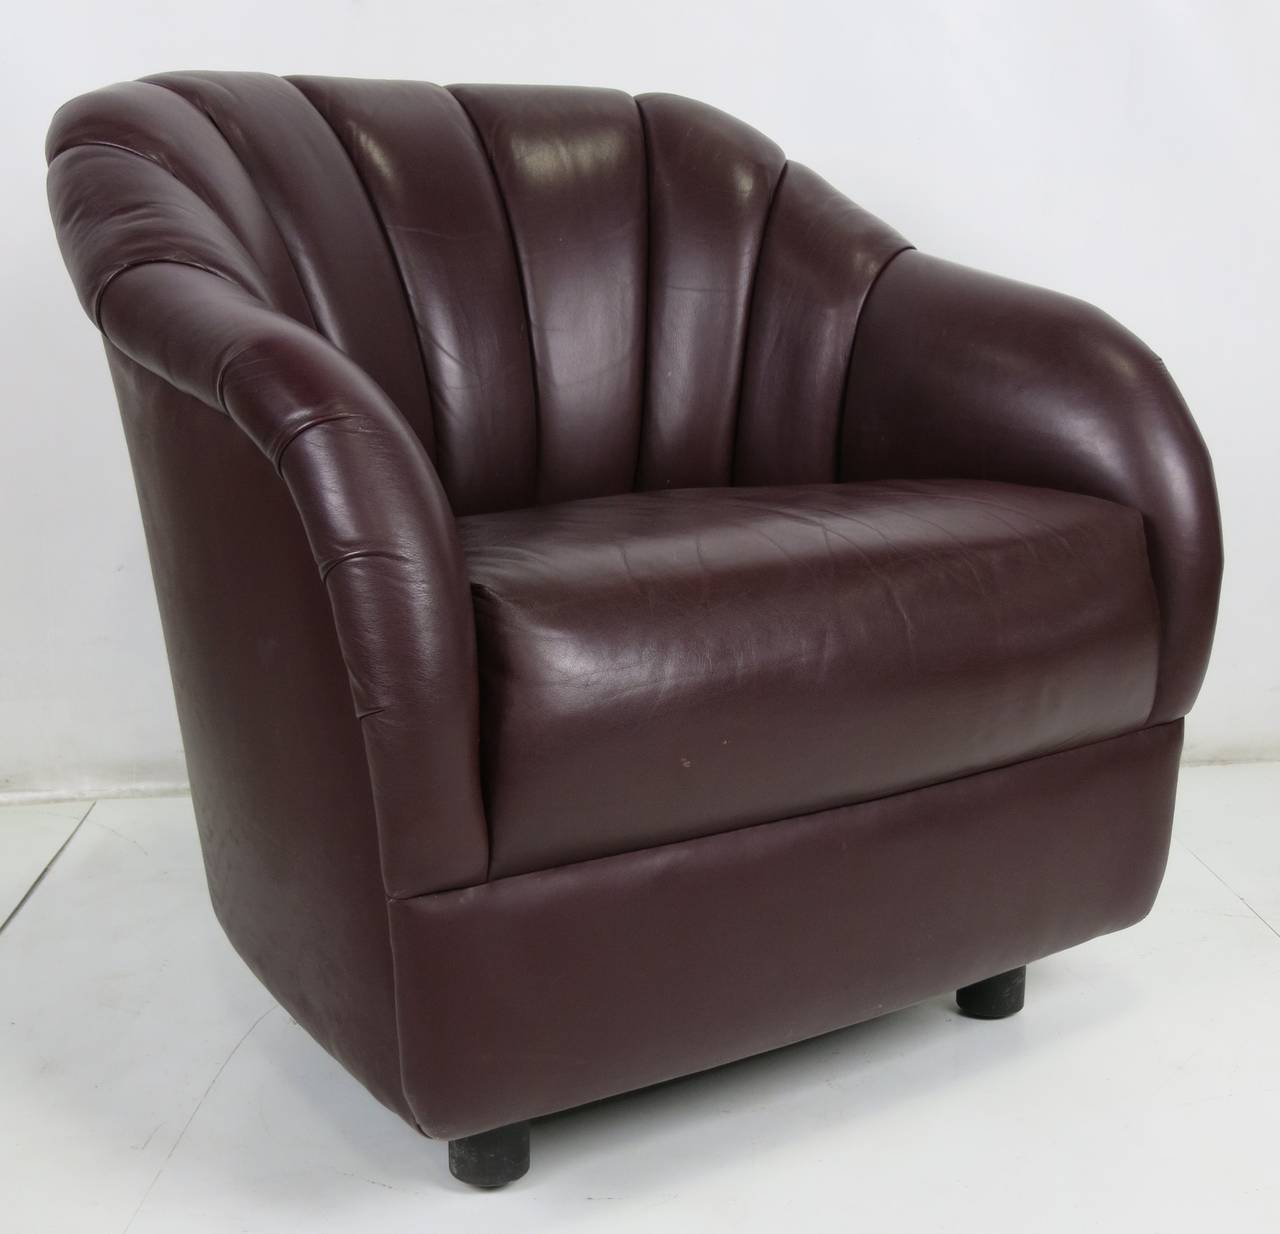 Handsome pair of leather lounge chairs by Ward Bennett for Brickel Associates. The pair are upholstered in a deep burgundy or brown leather and are in excellent original condition. When new, this model was offered with an optional swivel base. We